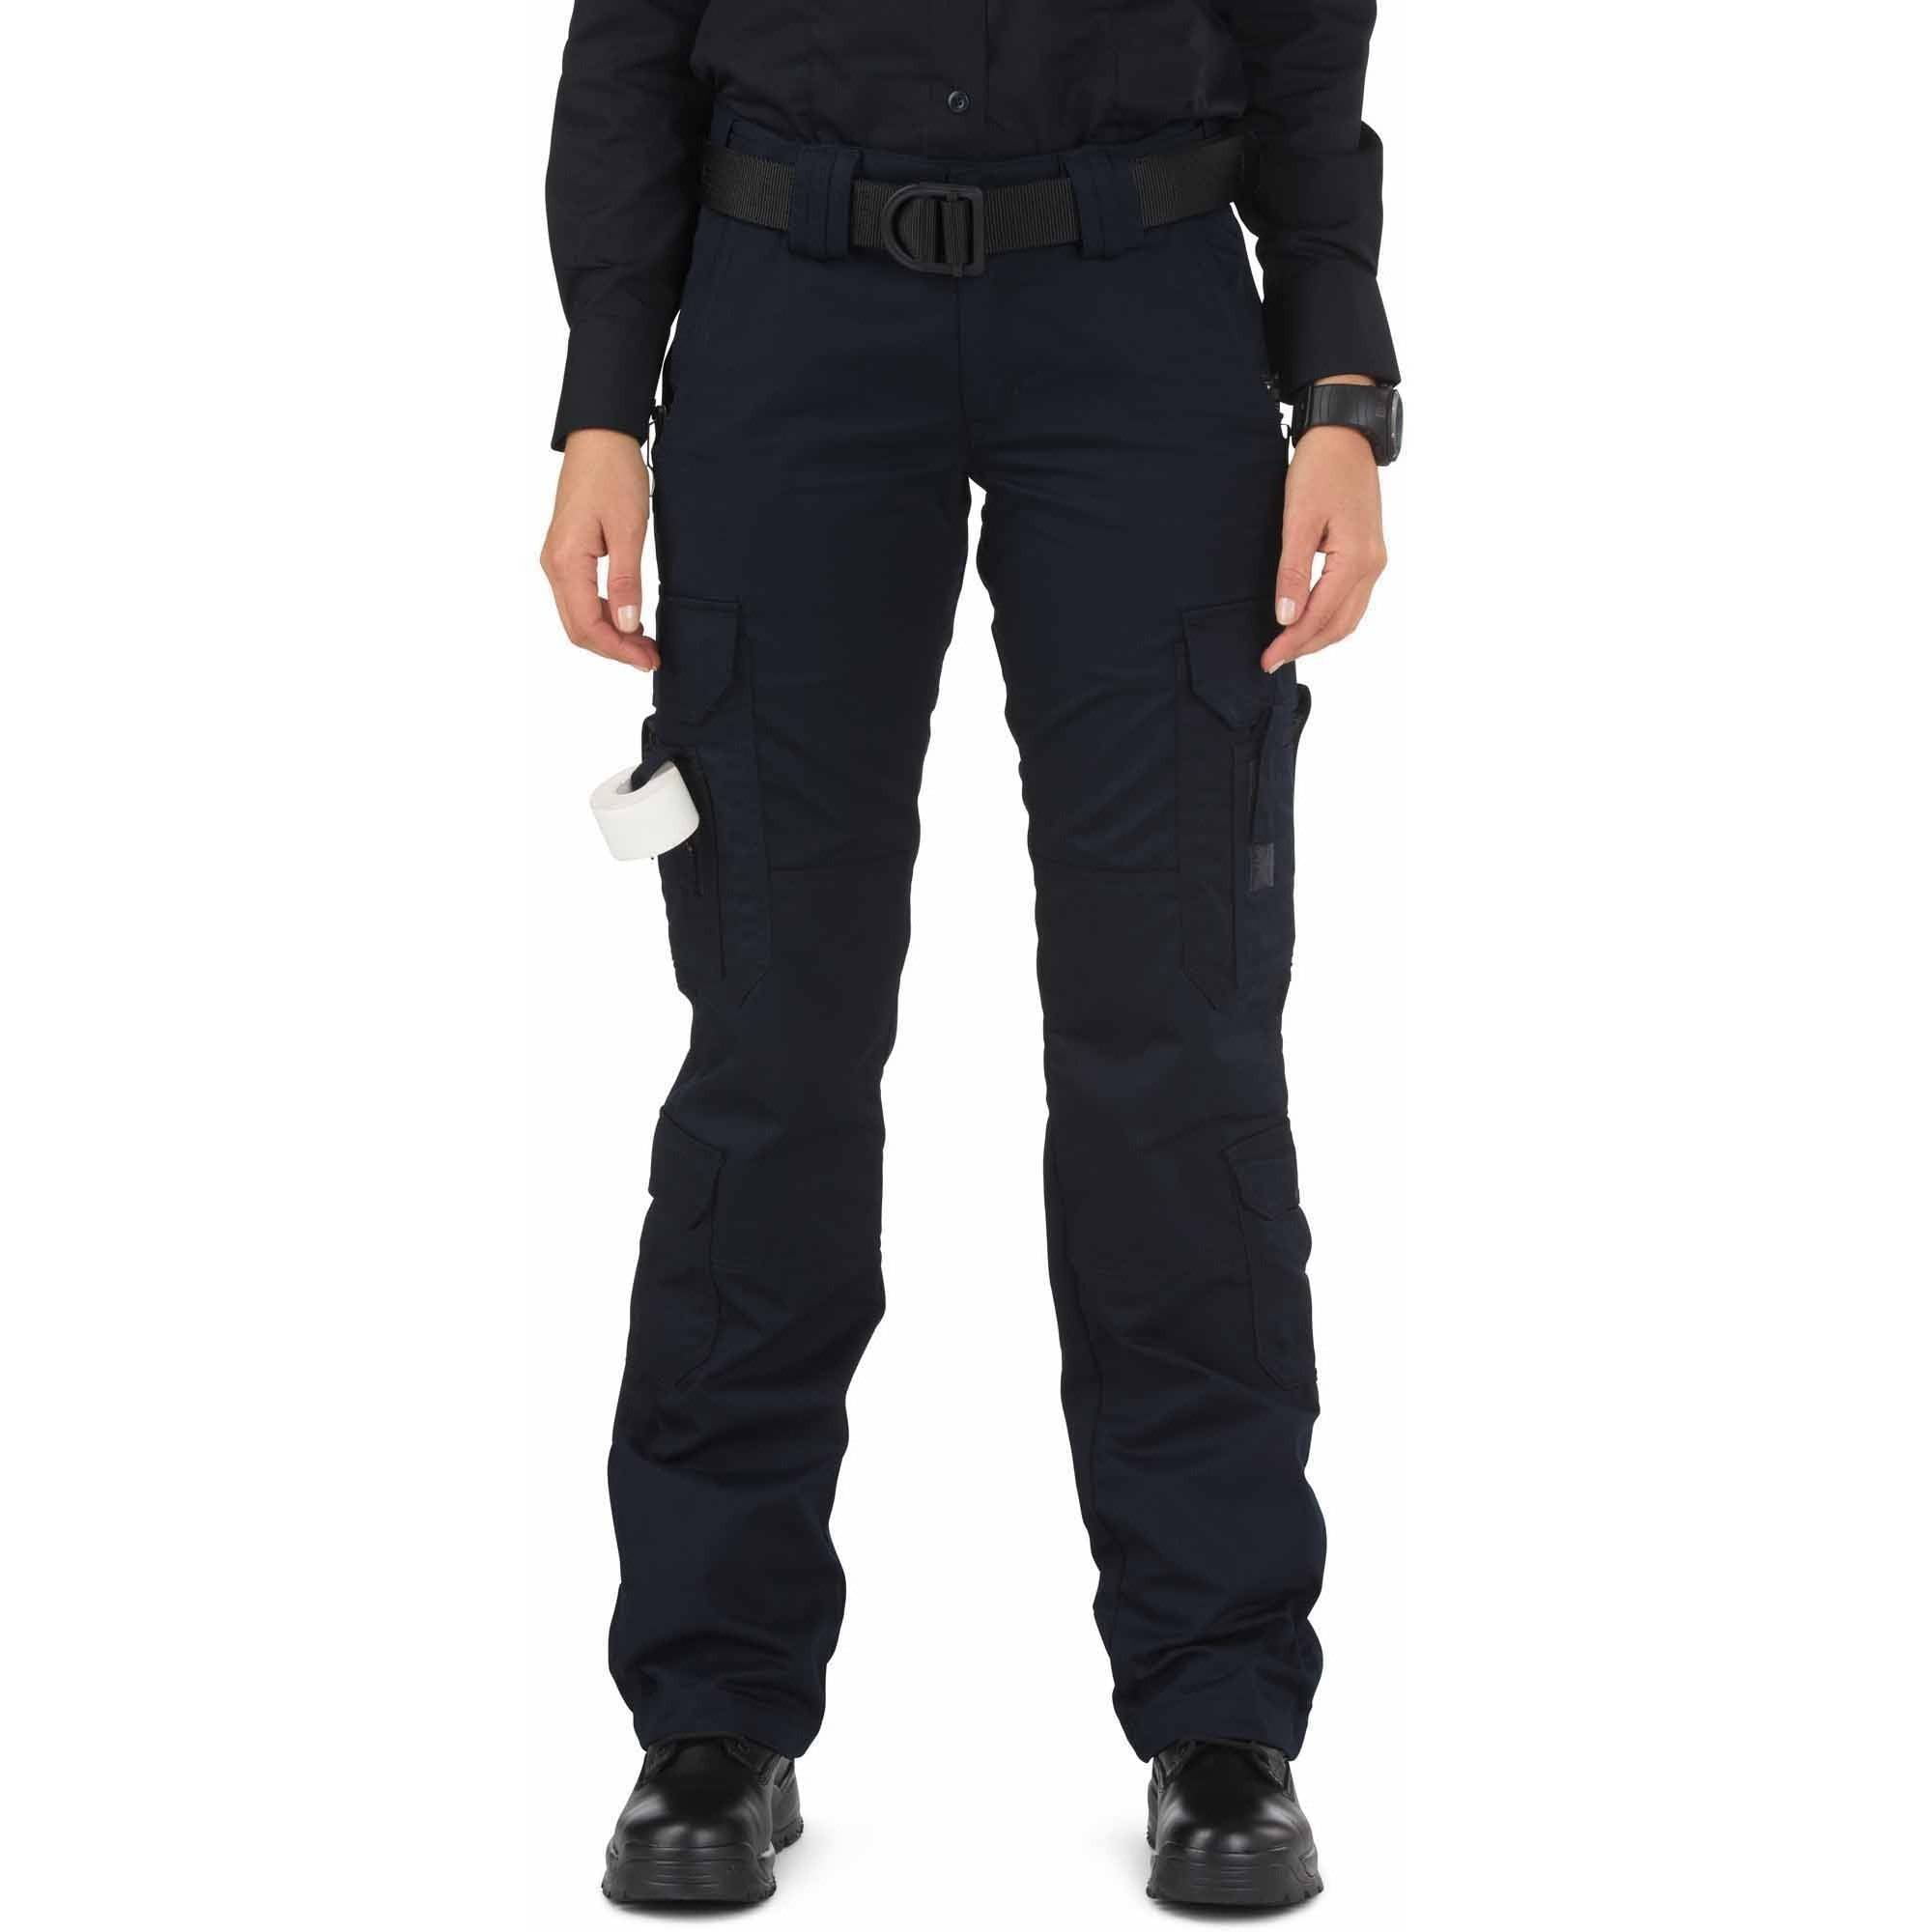 5624 Details about   Rothco Womens Navy EMT Pants 